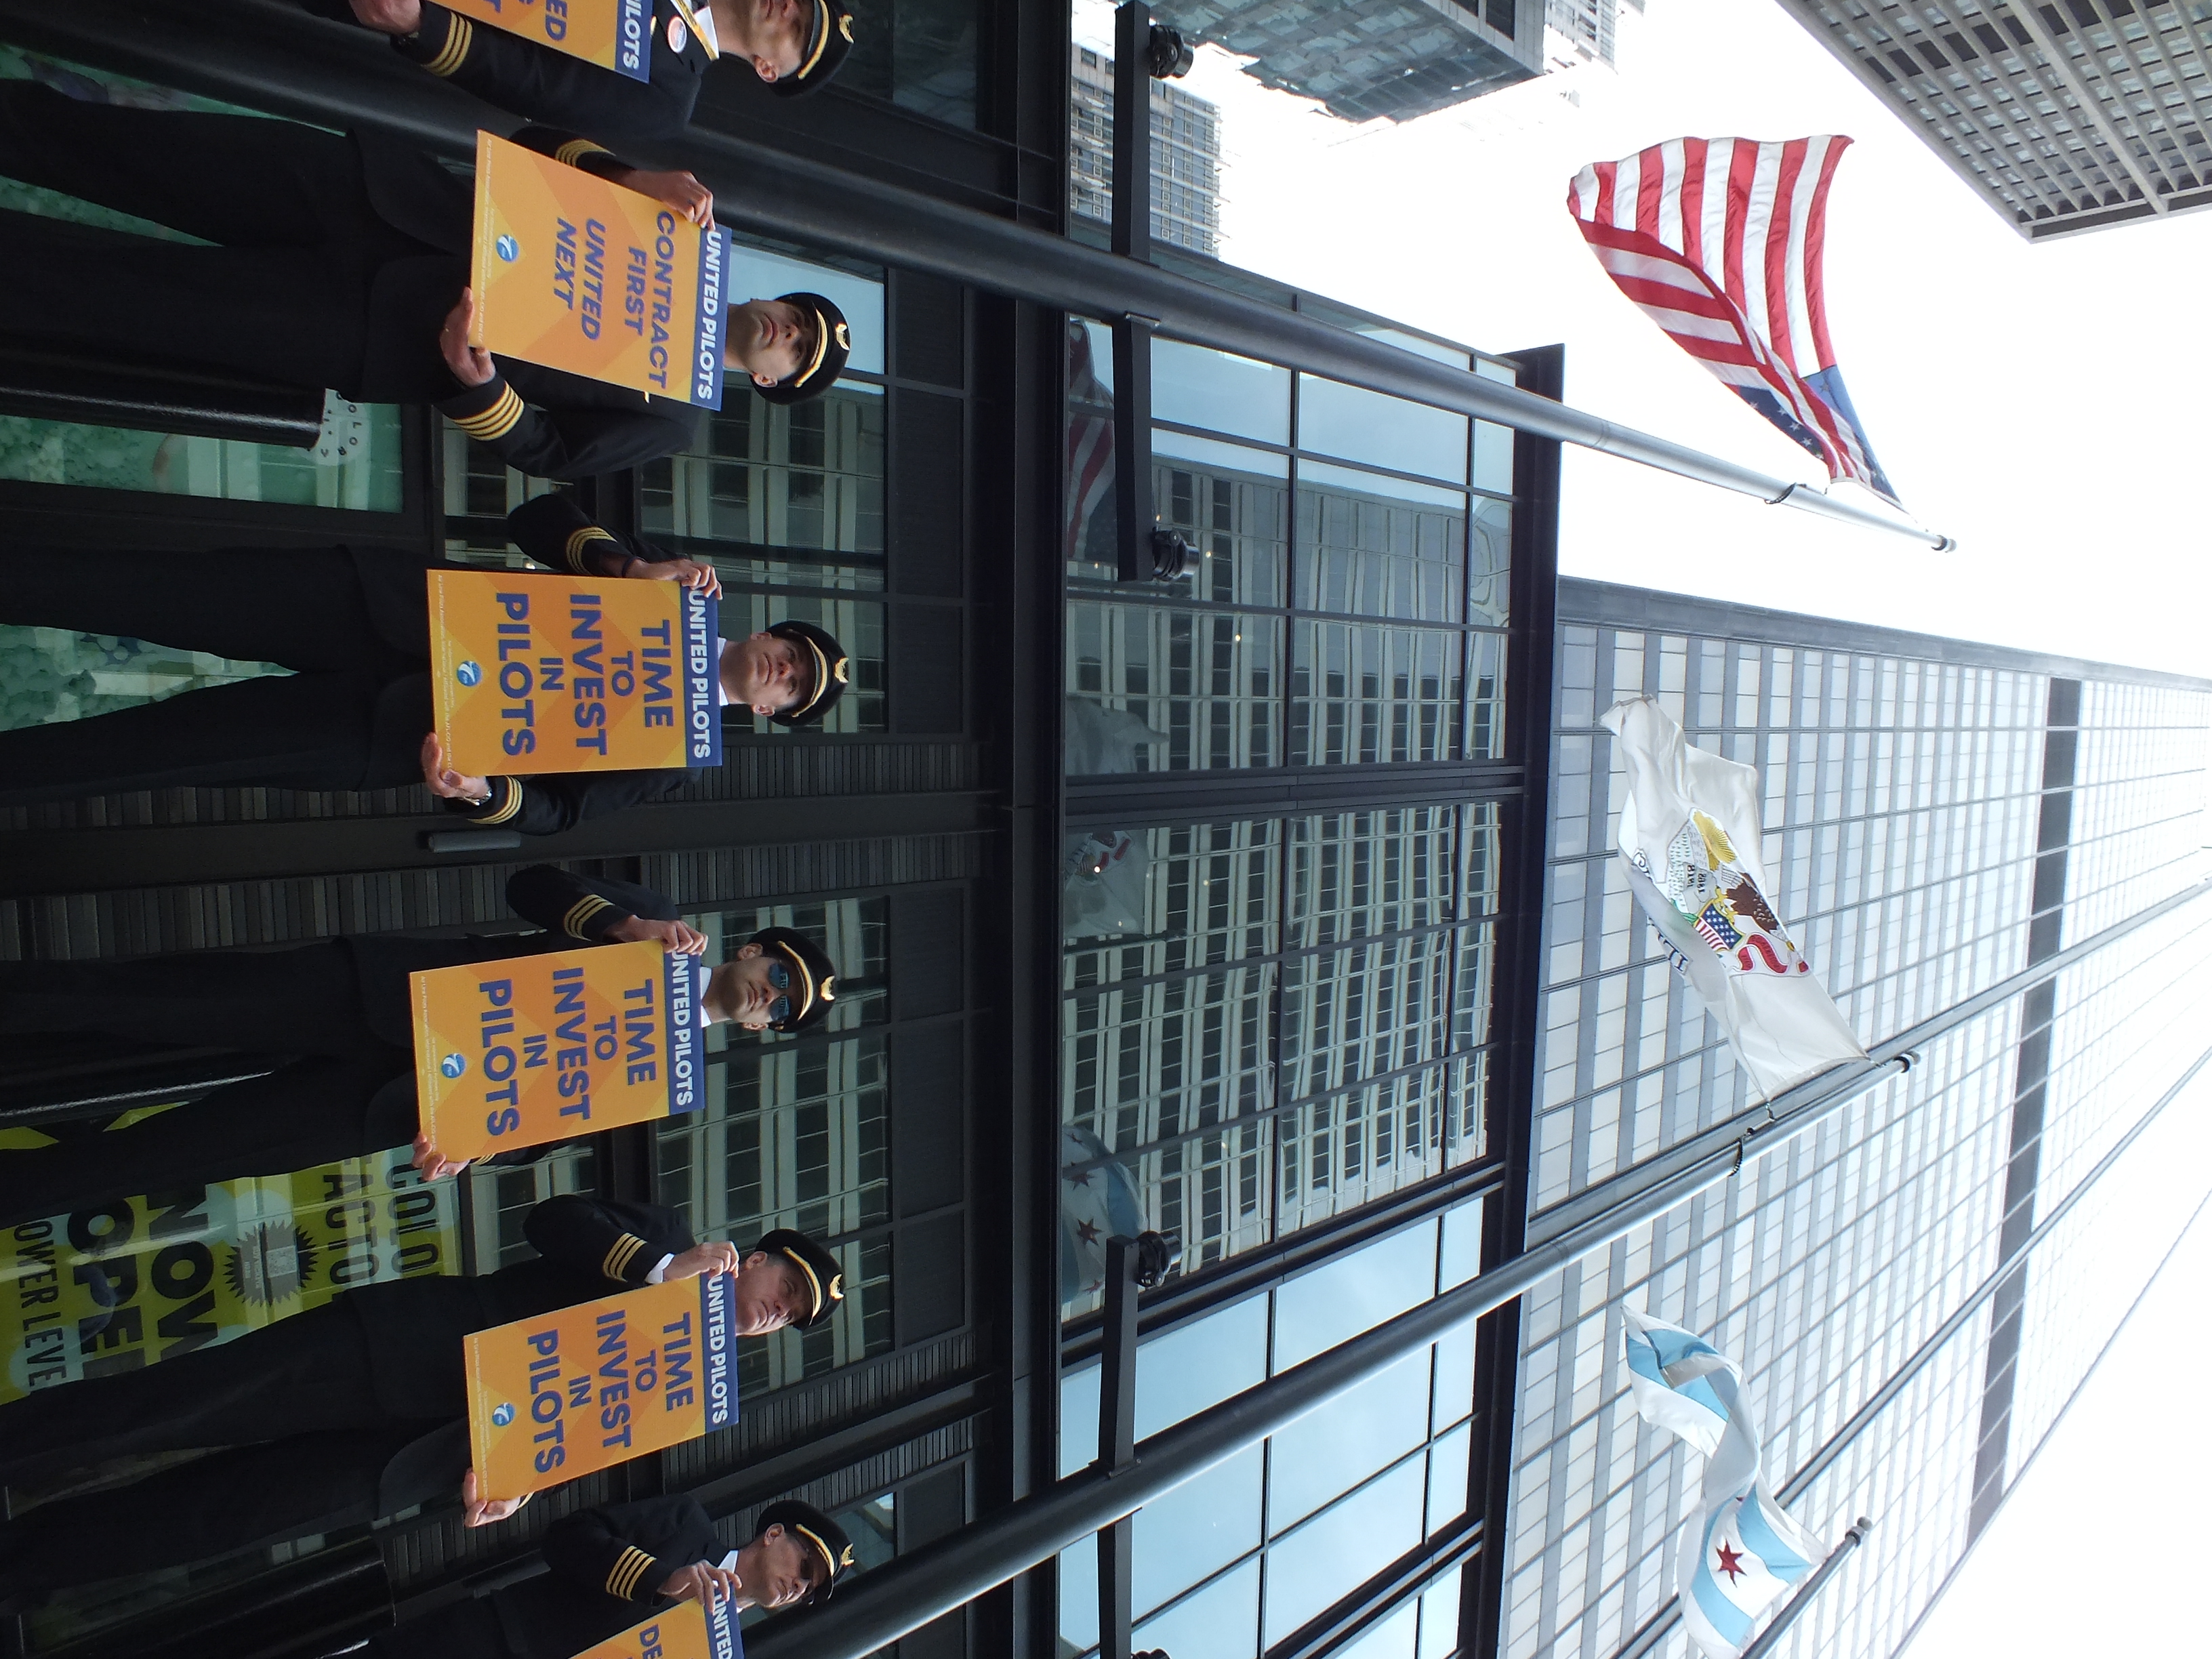 Pilots picketing in front of Willis Tower in Chicago